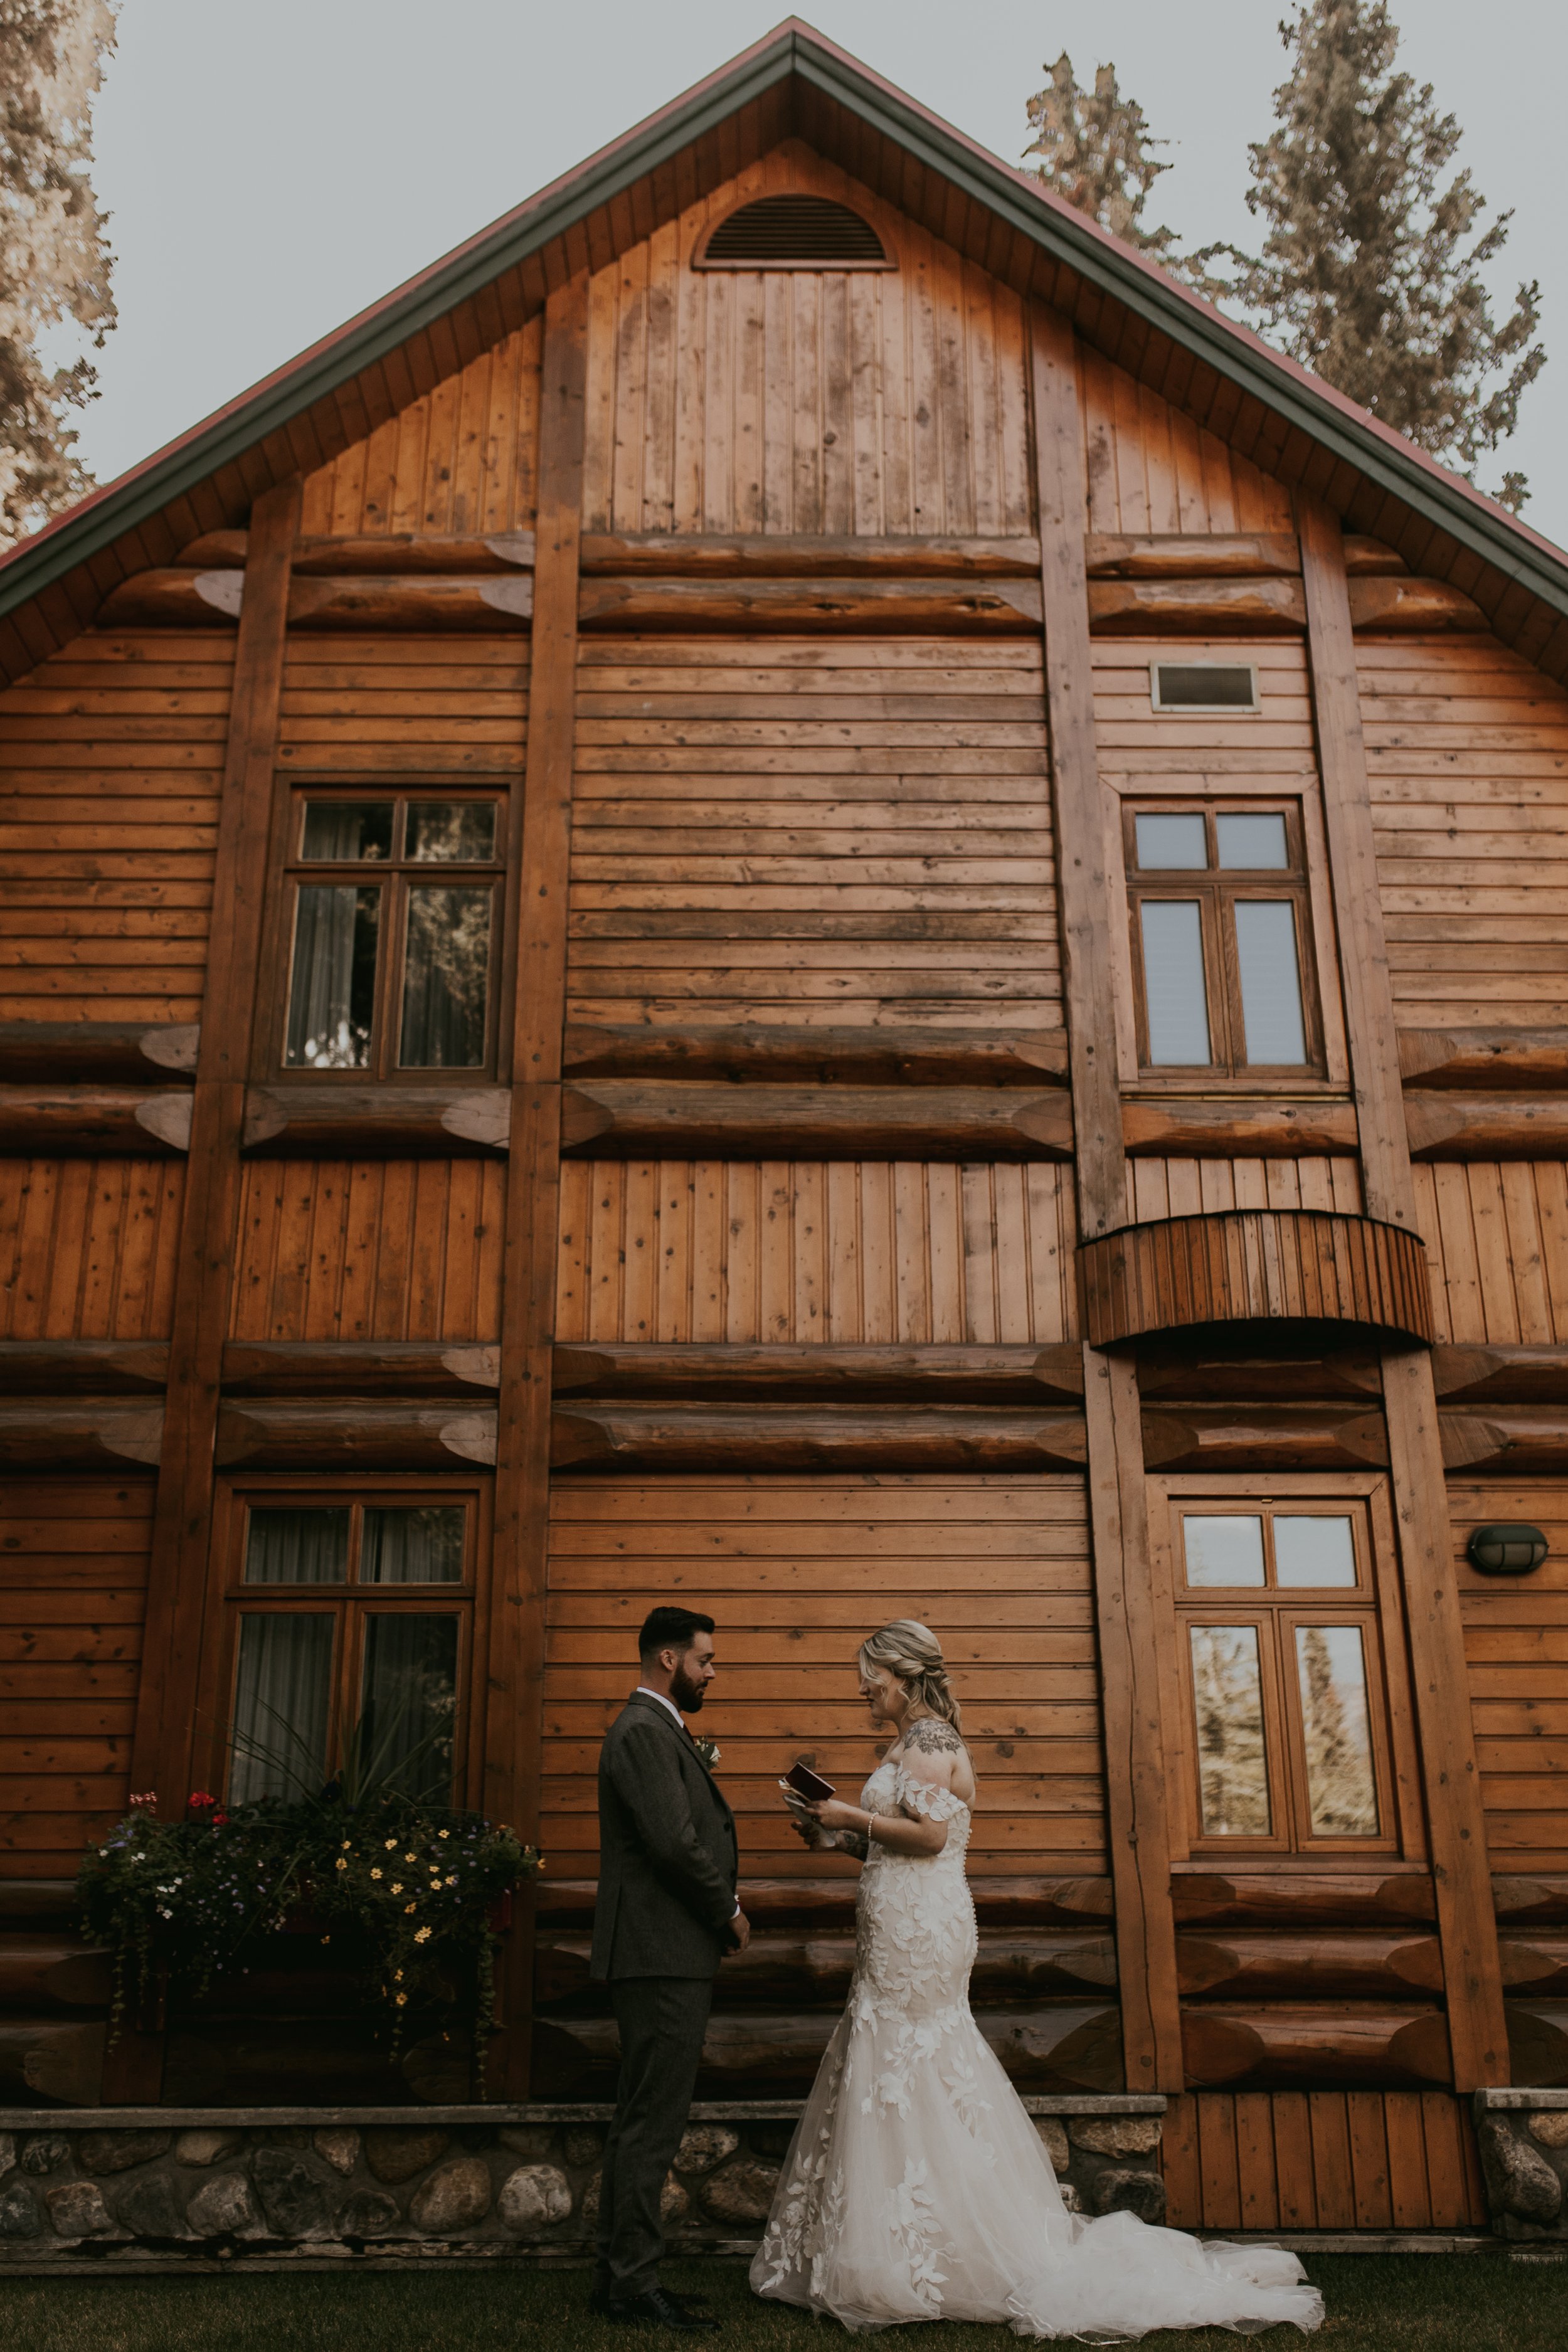 the post hotel wedding, Wedding at Post hotel, post hotel elopement